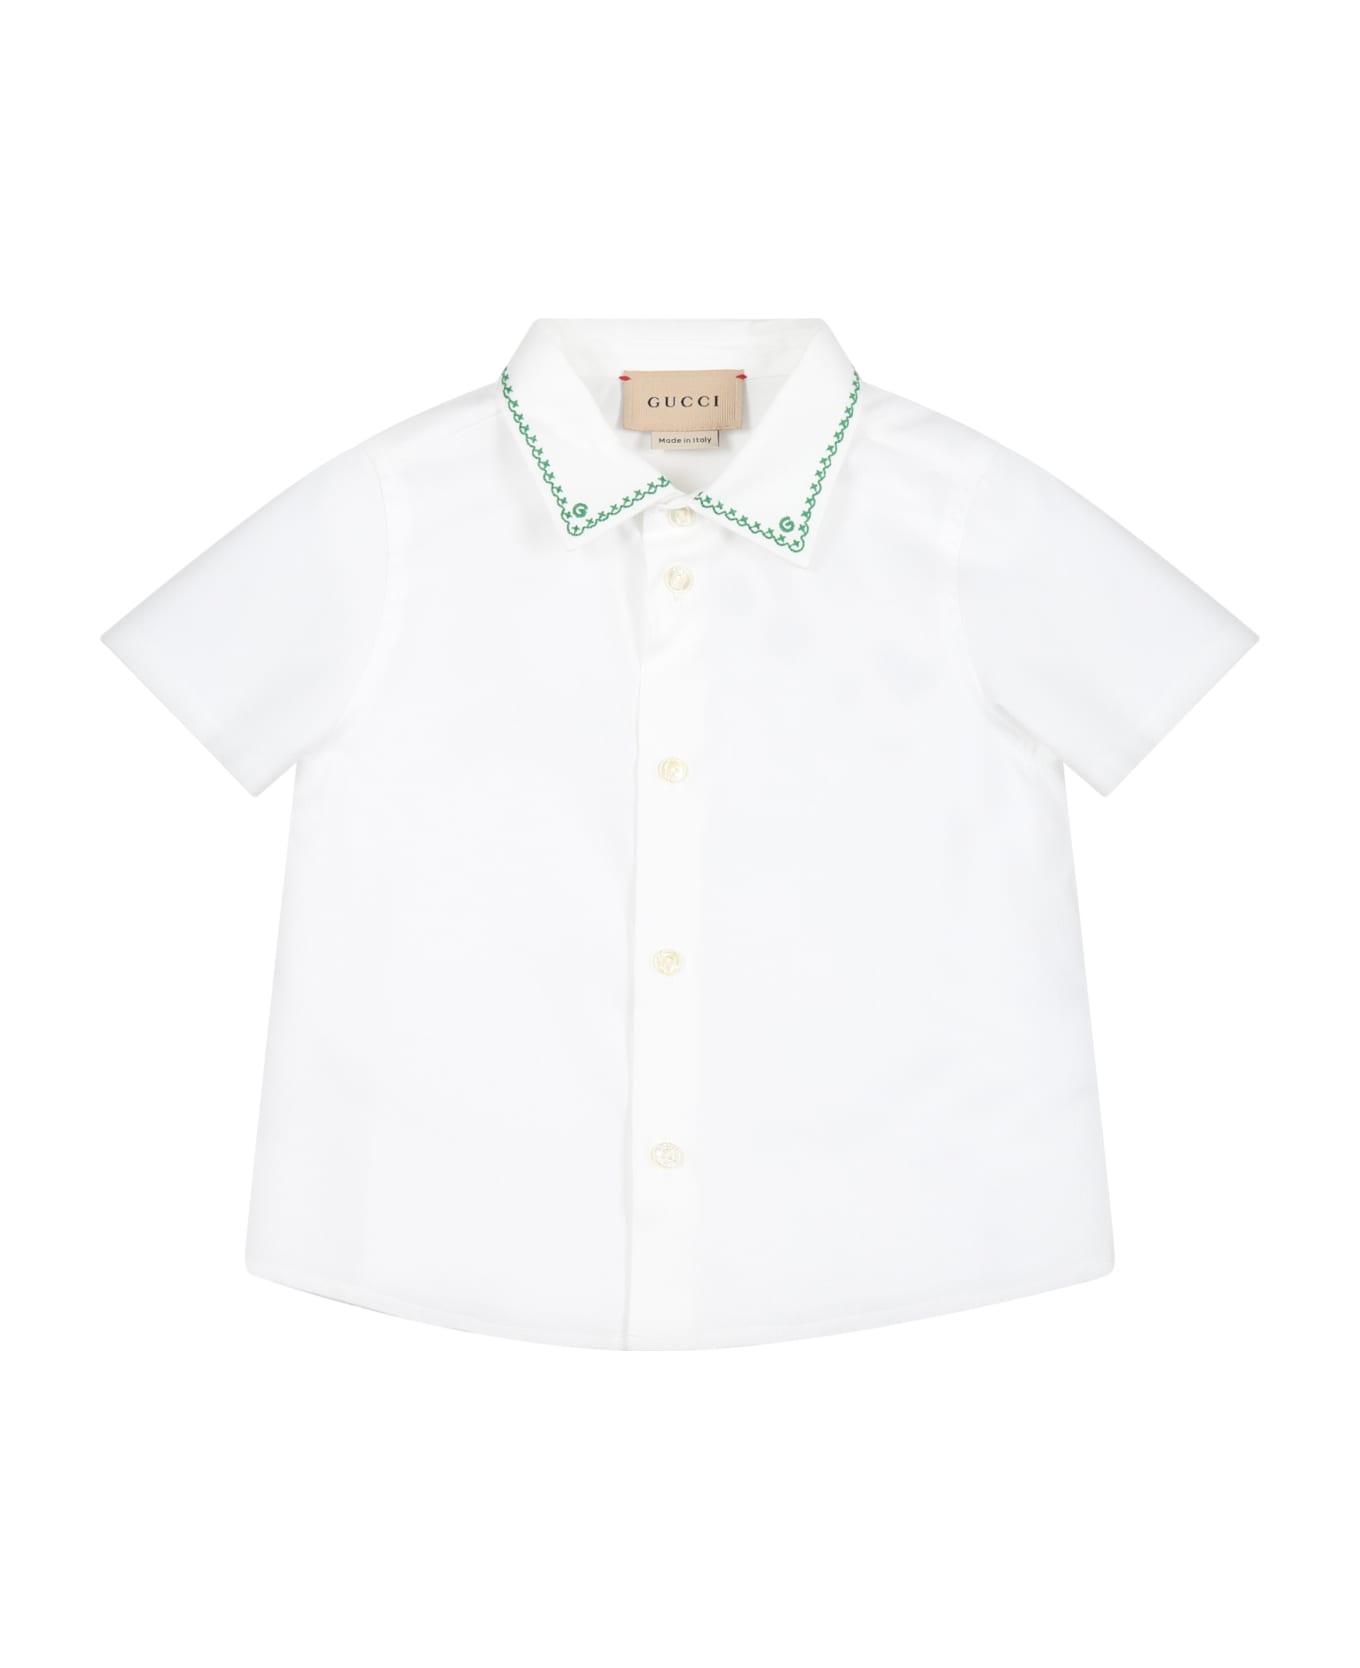 Gucci White Shirt For Baby Boy With Embroideries And Logo - White